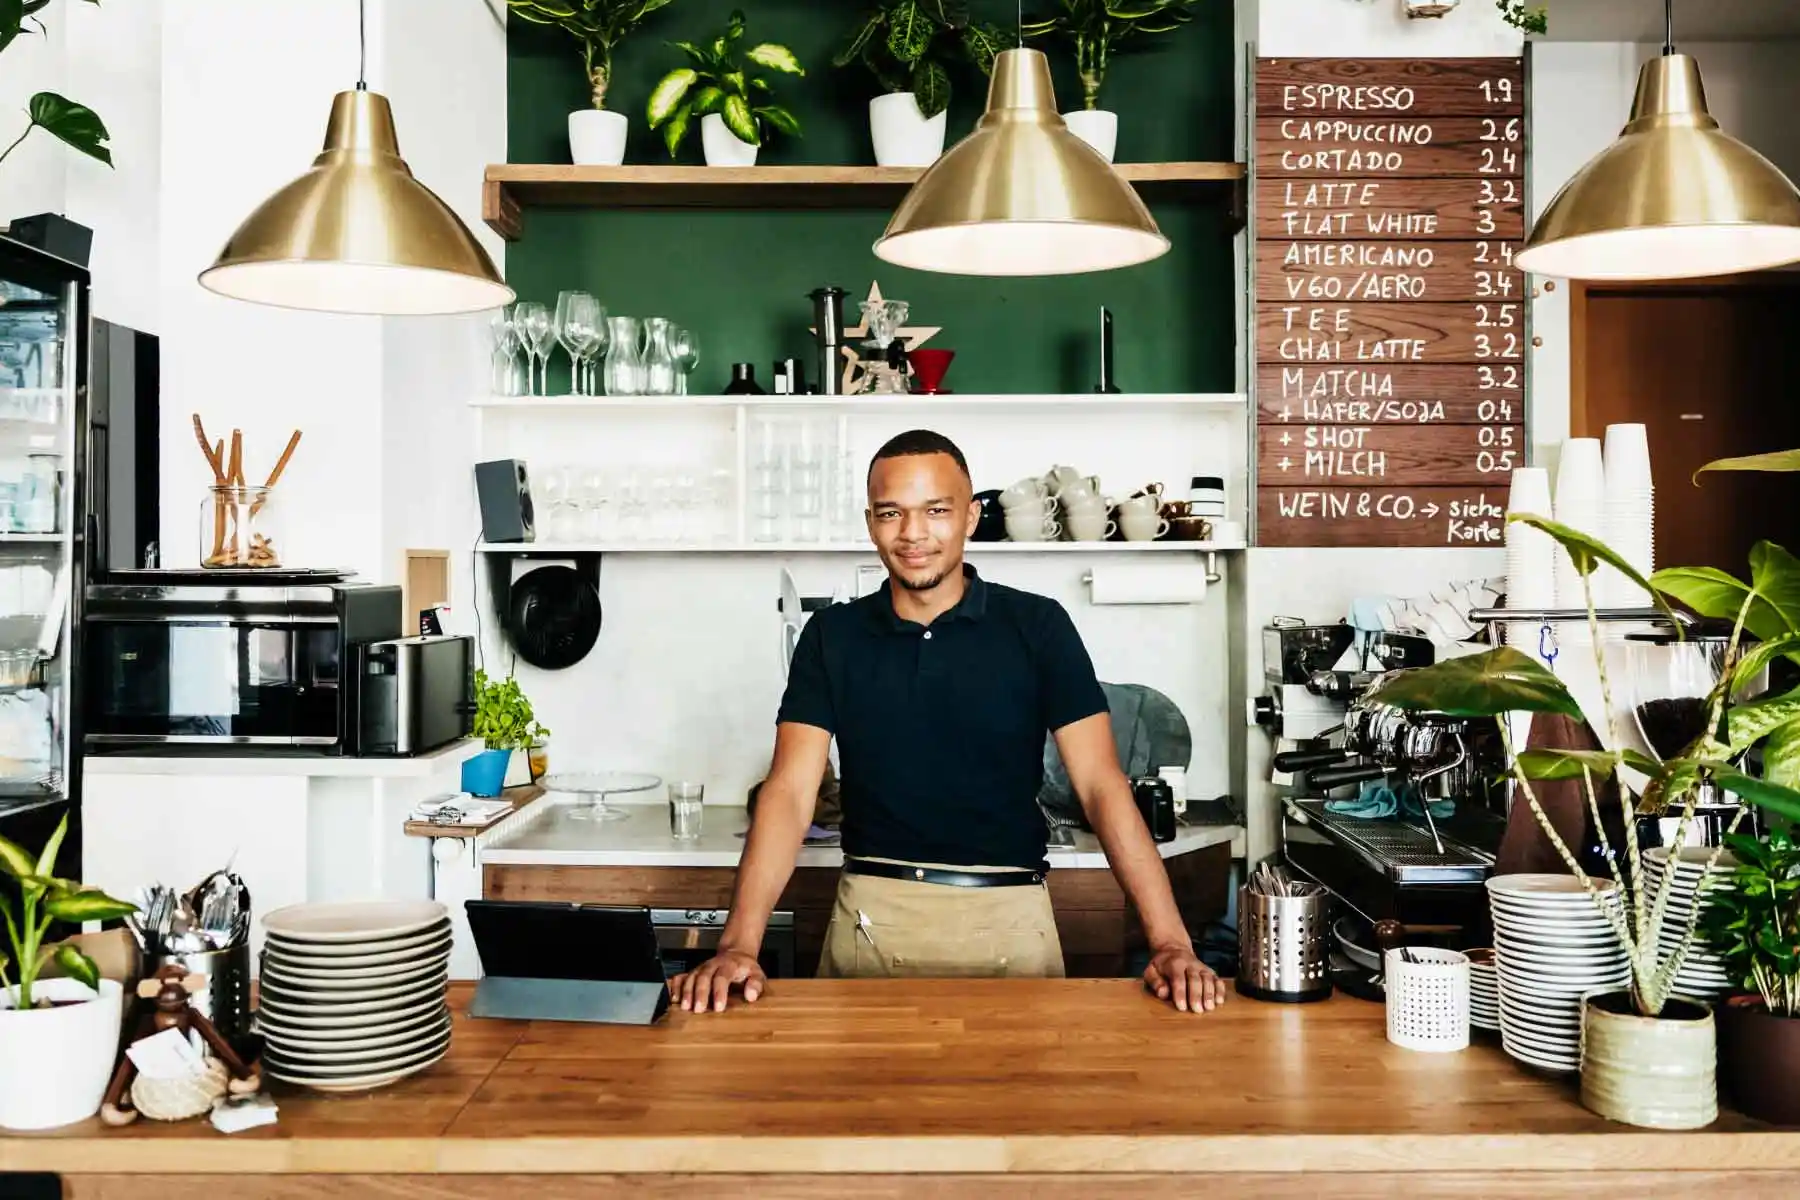 A barista standing at his service counter